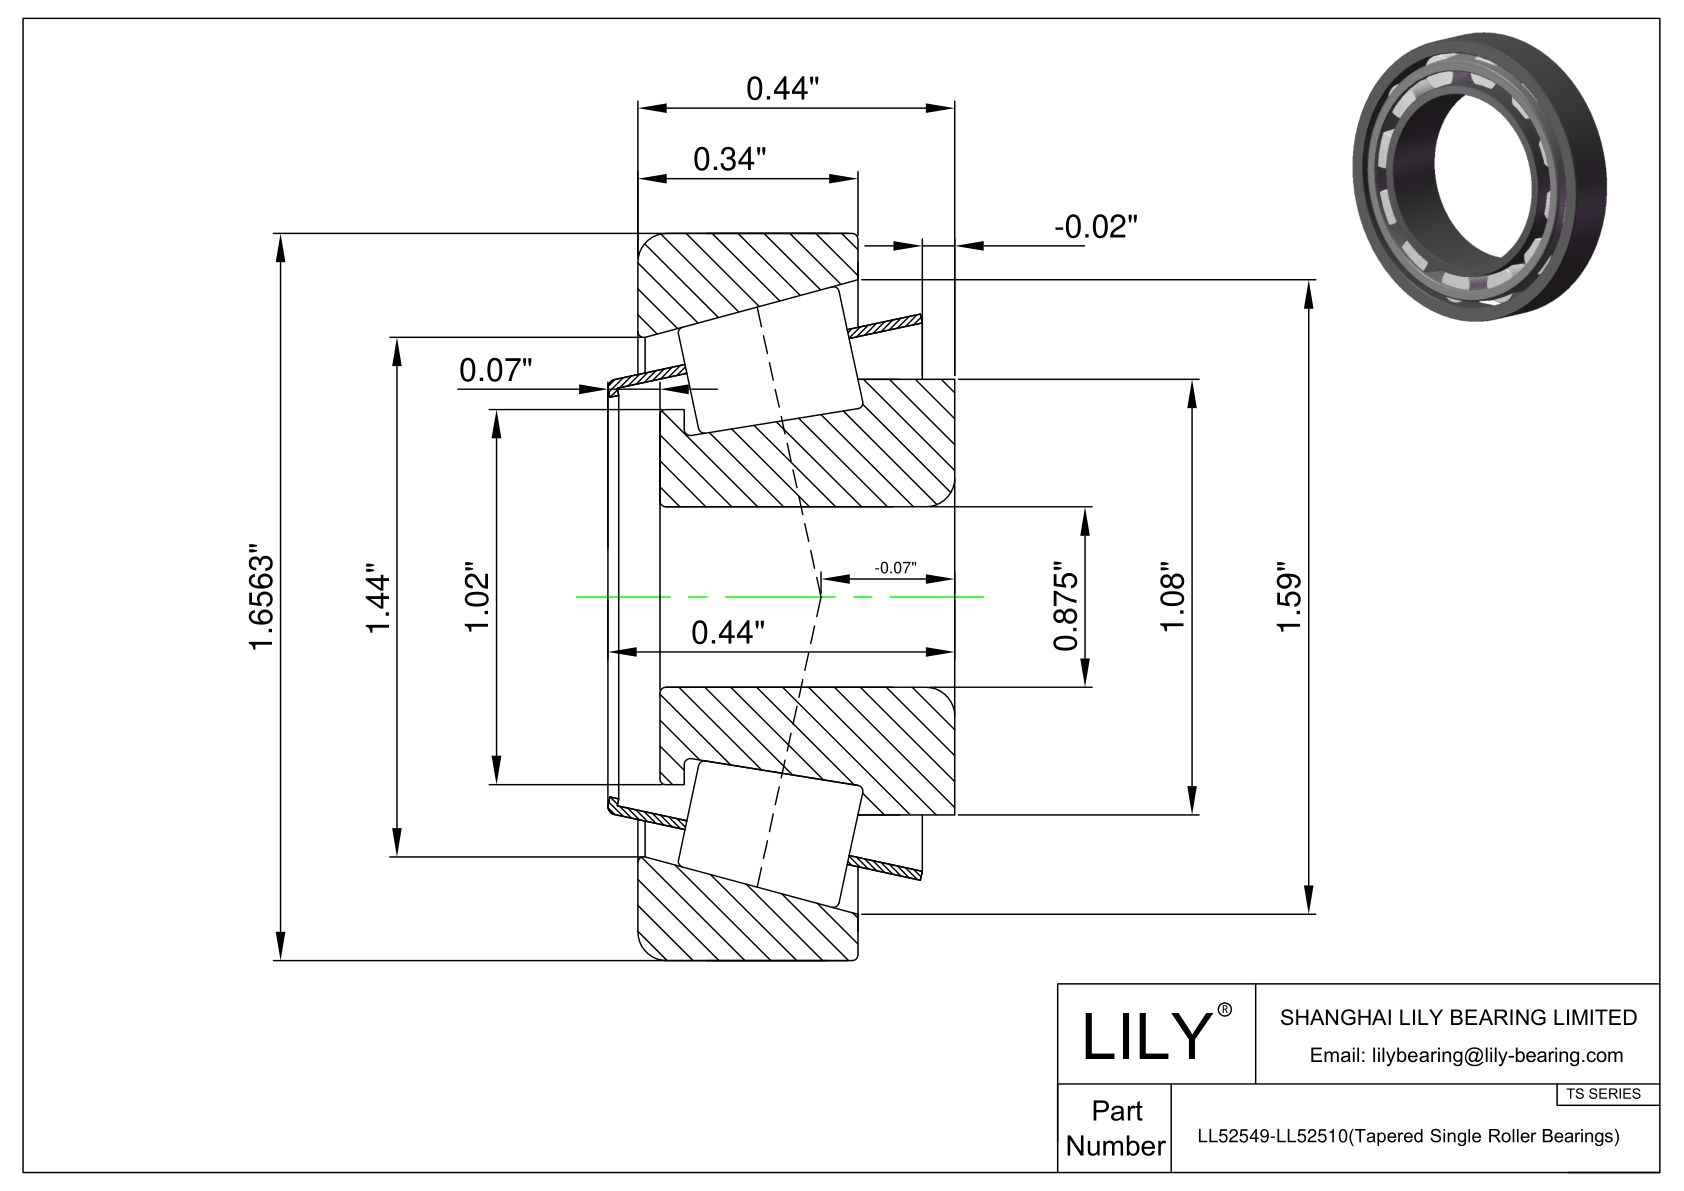 LL52549-LL52510 TS (Tapered Single Roller Bearings) (Imperial) cad drawing